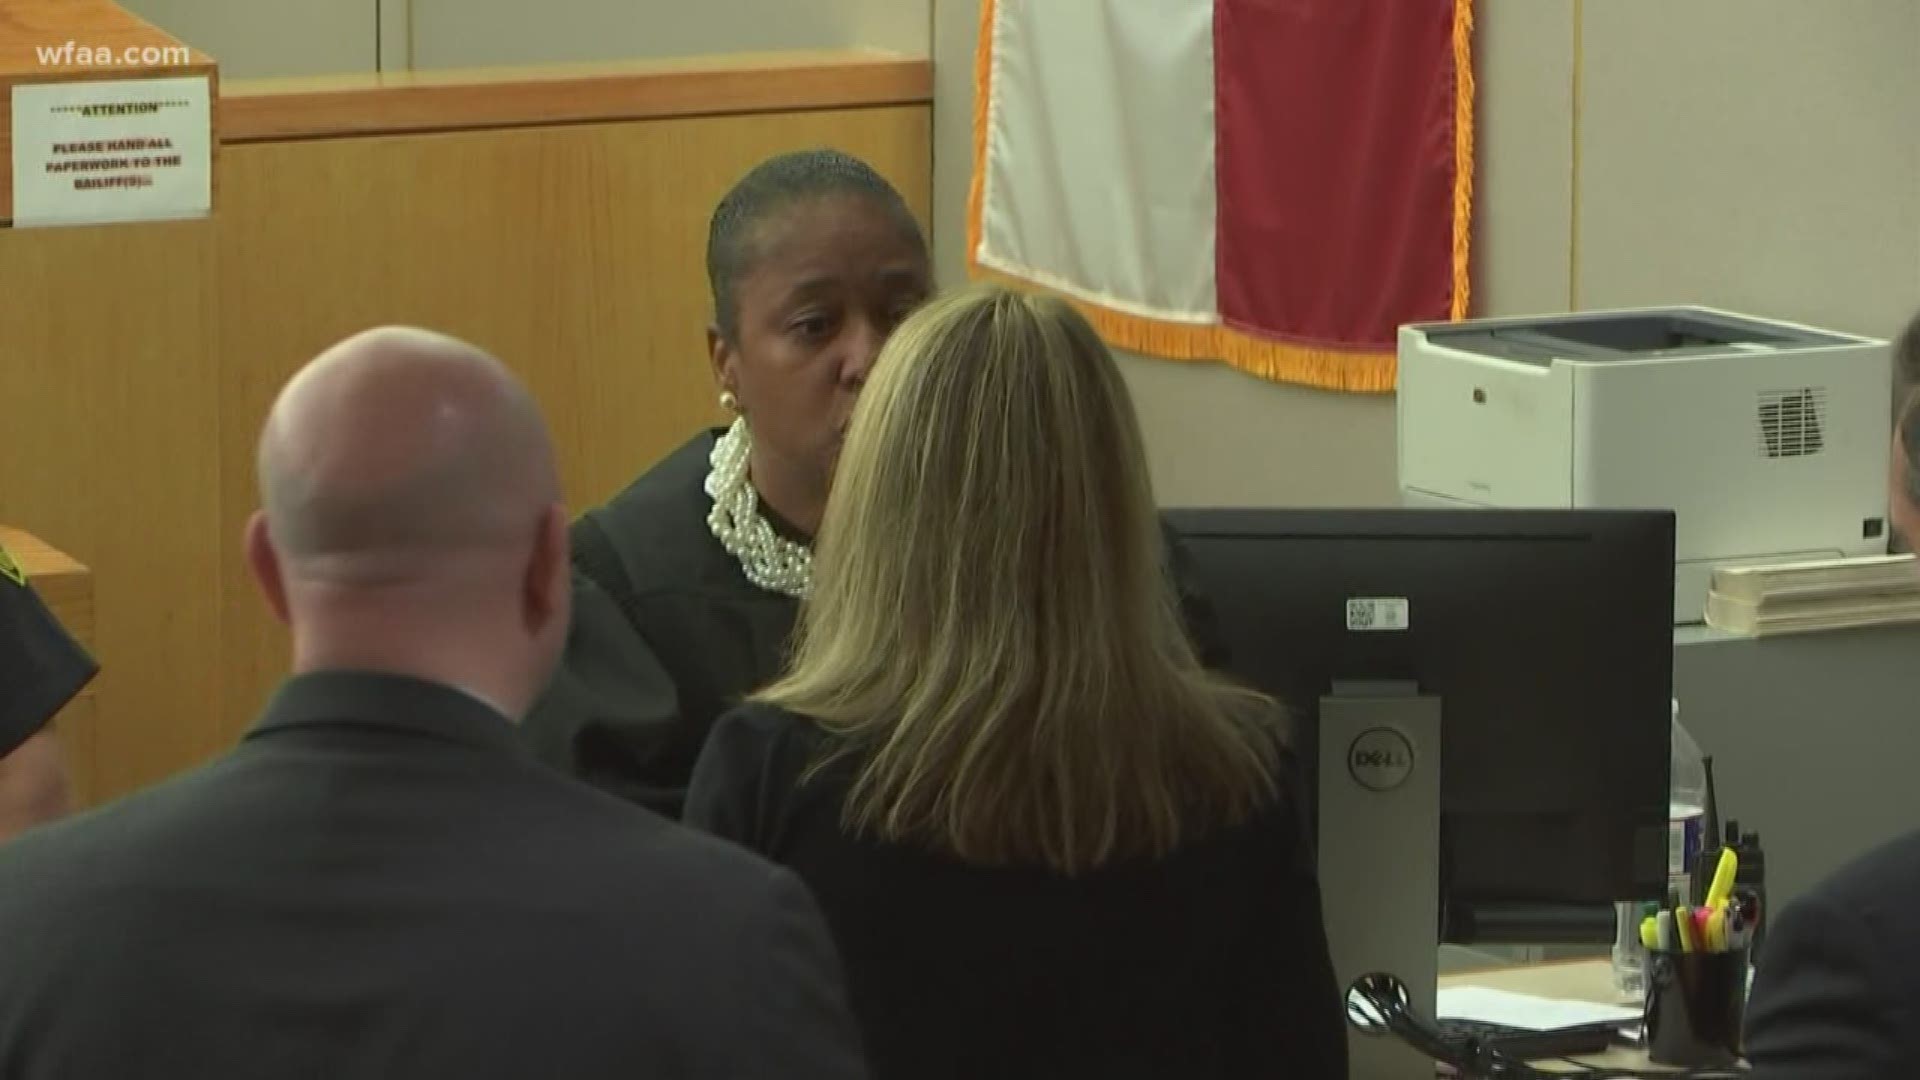 “This is your job,” the judge said, opening the book. The judge mentioned John 3:16, saying this will strengthen her. Guyger nodded her head.